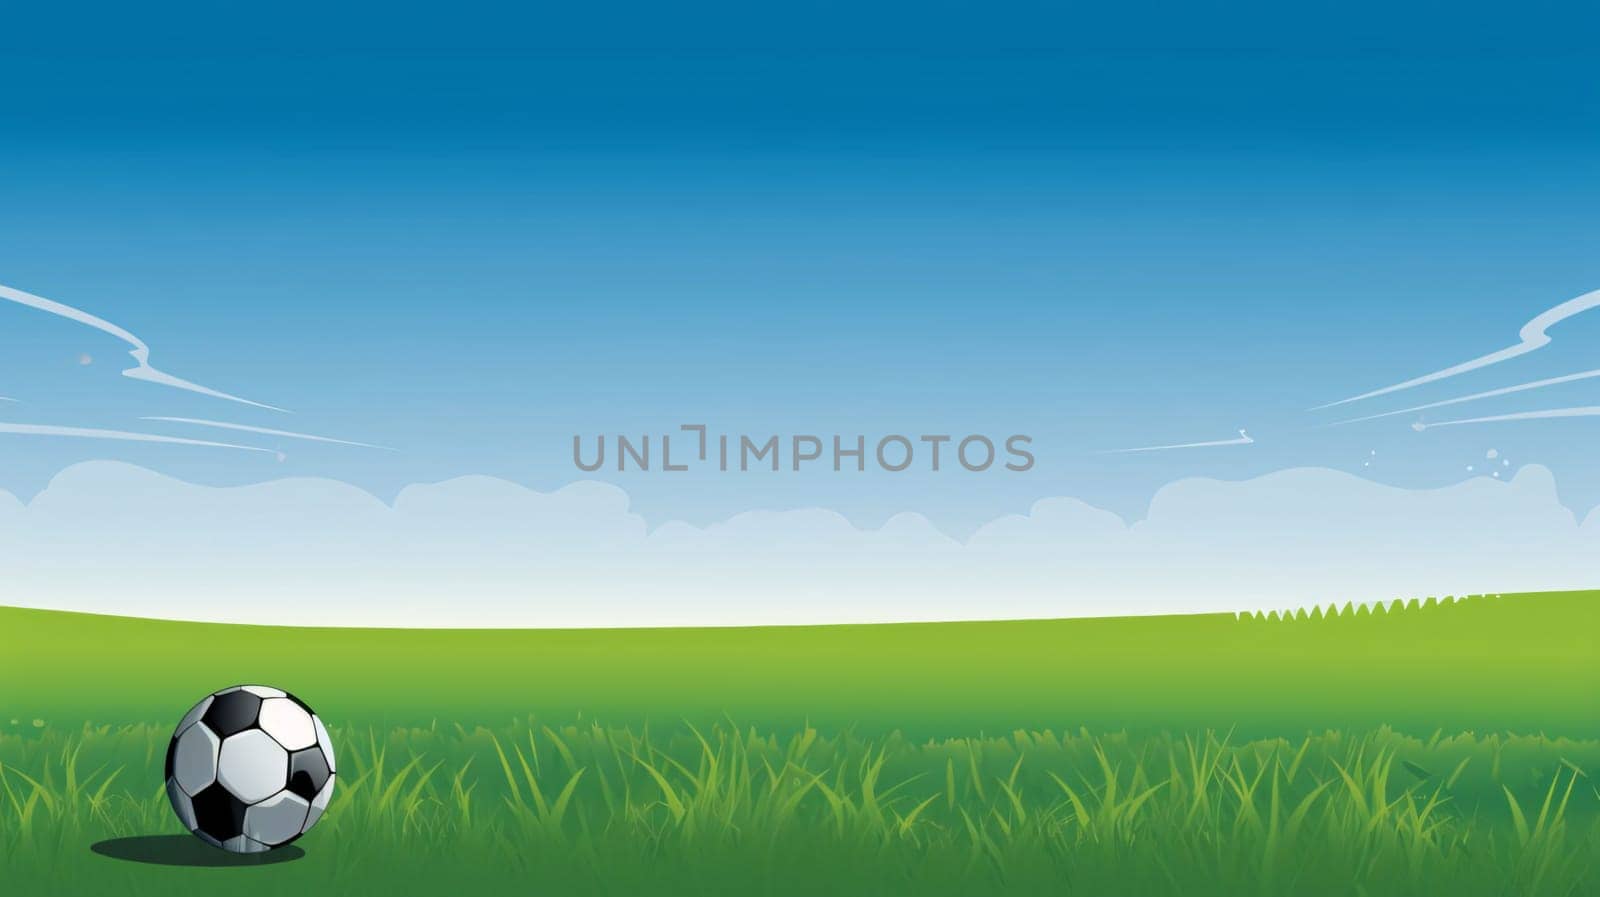 Banner: Soccer ball on green grass and blue sky background. Vector illustration.